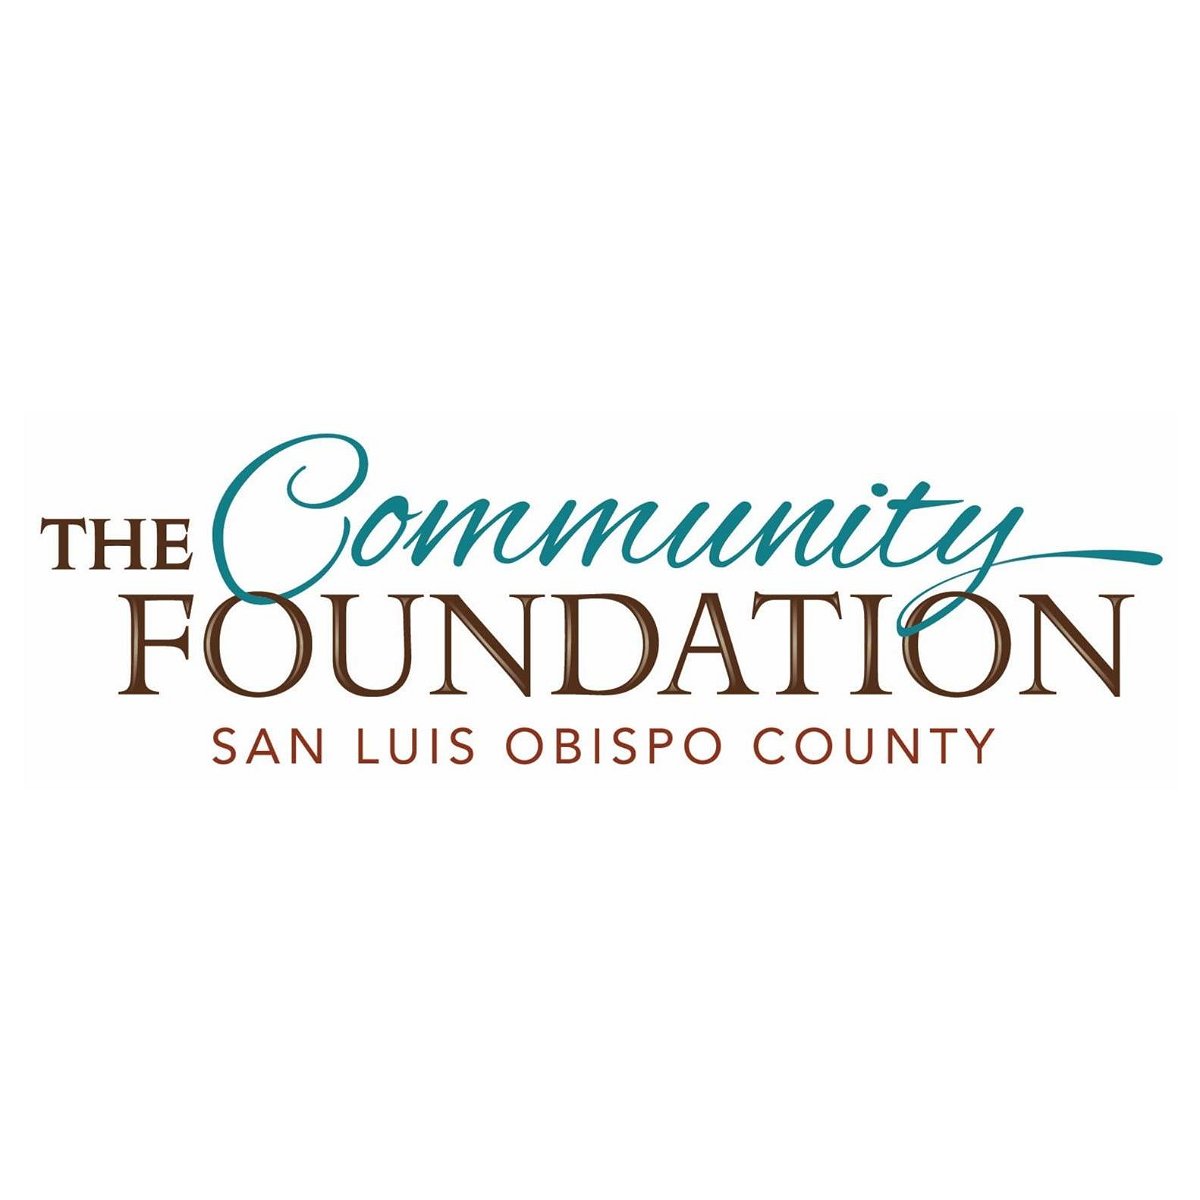 The Community Foundation San Luis Obispo County has awarded grants totaling over $400,000 to various foundations 